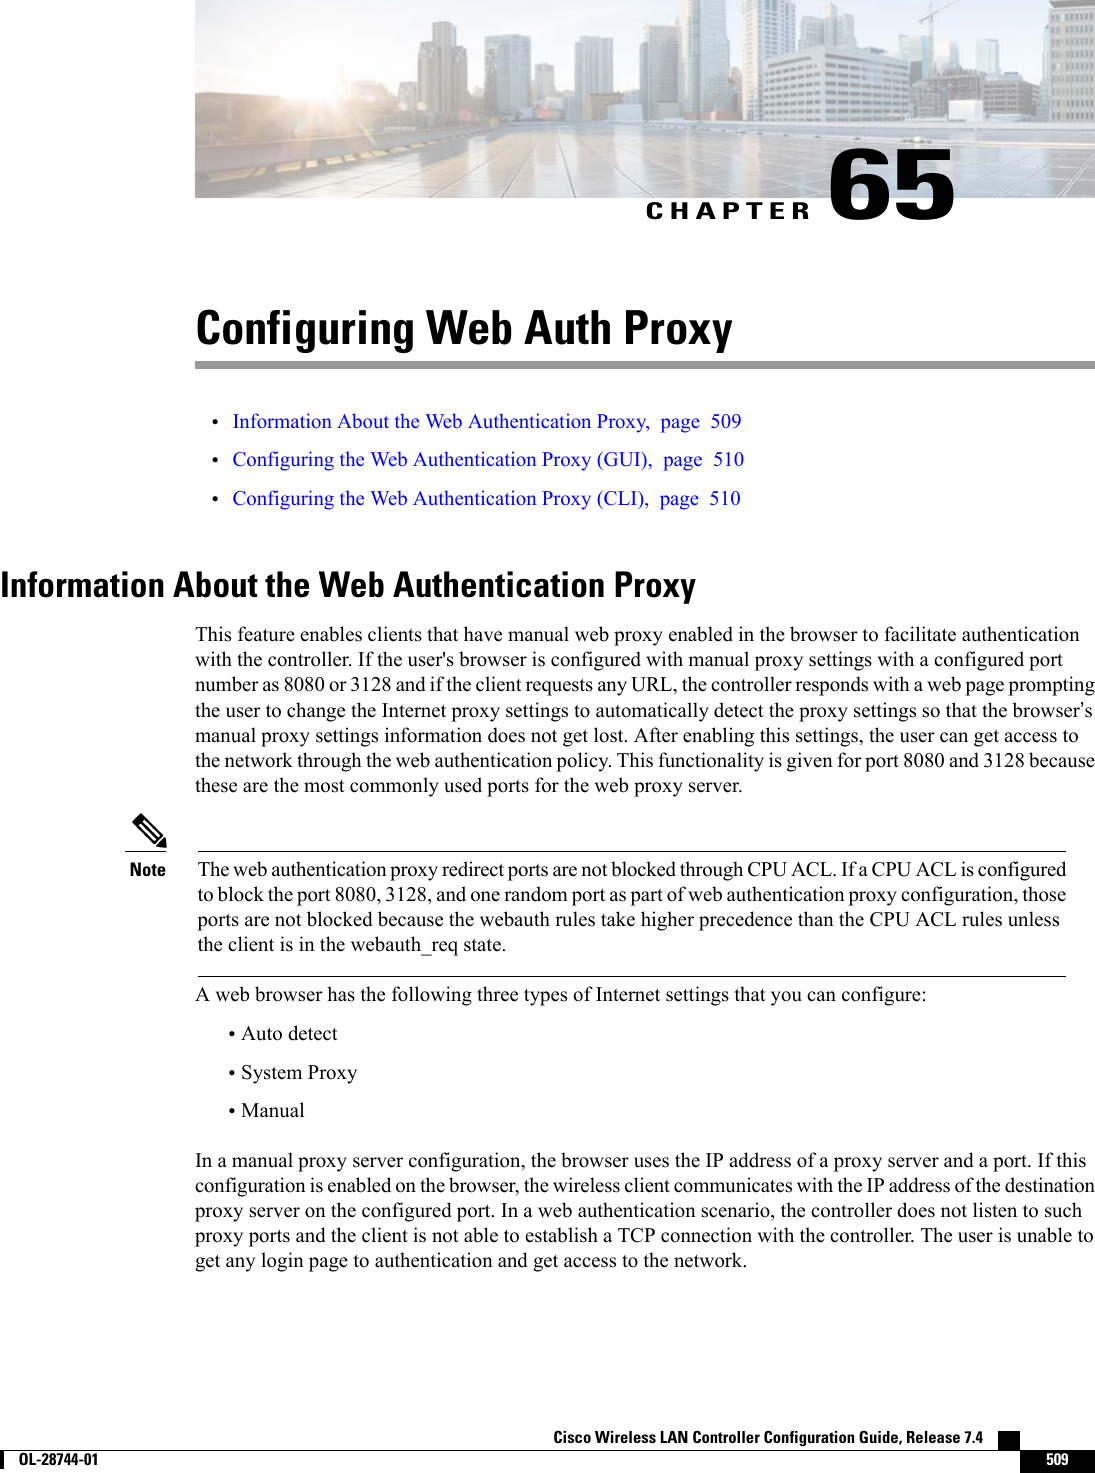 CHAPTER 65Configuring Web Auth Proxy•Information About the Web Authentication Proxy, page 509•Configuring the Web Authentication Proxy (GUI), page 510•Configuring the Web Authentication Proxy (CLI), page 510Information About the Web Authentication ProxyThis feature enables clients that have manual web proxy enabled in the browser to facilitate authenticationwith the controller. If the user&apos;s browser is configured with manual proxy settings with a configured portnumber as 8080 or 3128 and if the client requests any URL, the controller responds with a web page promptingthe user to change the Internet proxy settings to automatically detect the proxy settings so that the browser’smanual proxy settings information does not get lost. After enabling this settings, the user can get access tothe network through the web authentication policy. This functionality is given for port 8080 and 3128 becausethese are the most commonly used ports for the web proxy server.The web authentication proxy redirect ports are not blocked through CPU ACL. If a CPU ACL is configuredto block the port 8080, 3128, and one random port as part of web authentication proxy configuration, thoseports are not blocked because the webauth rules take higher precedence than the CPU ACL rules unlessthe client is in the webauth_req state.NoteA web browser has the following three types of Internet settings that you can configure:•Auto detect•System Proxy•ManualIn a manual proxy server configuration, the browser uses the IP address of a proxy server and a port. If thisconfiguration is enabled on the browser, the wireless client communicates with the IP address of the destinationproxy server on the configured port. In a web authentication scenario, the controller does not listen to suchproxy ports and the client is not able to establish a TCP connection with the controller. The user is unable toget any login page to authentication and get access to the network.Cisco Wireless LAN Controller Configuration Guide, Release 7.4        OL-28744-01 509